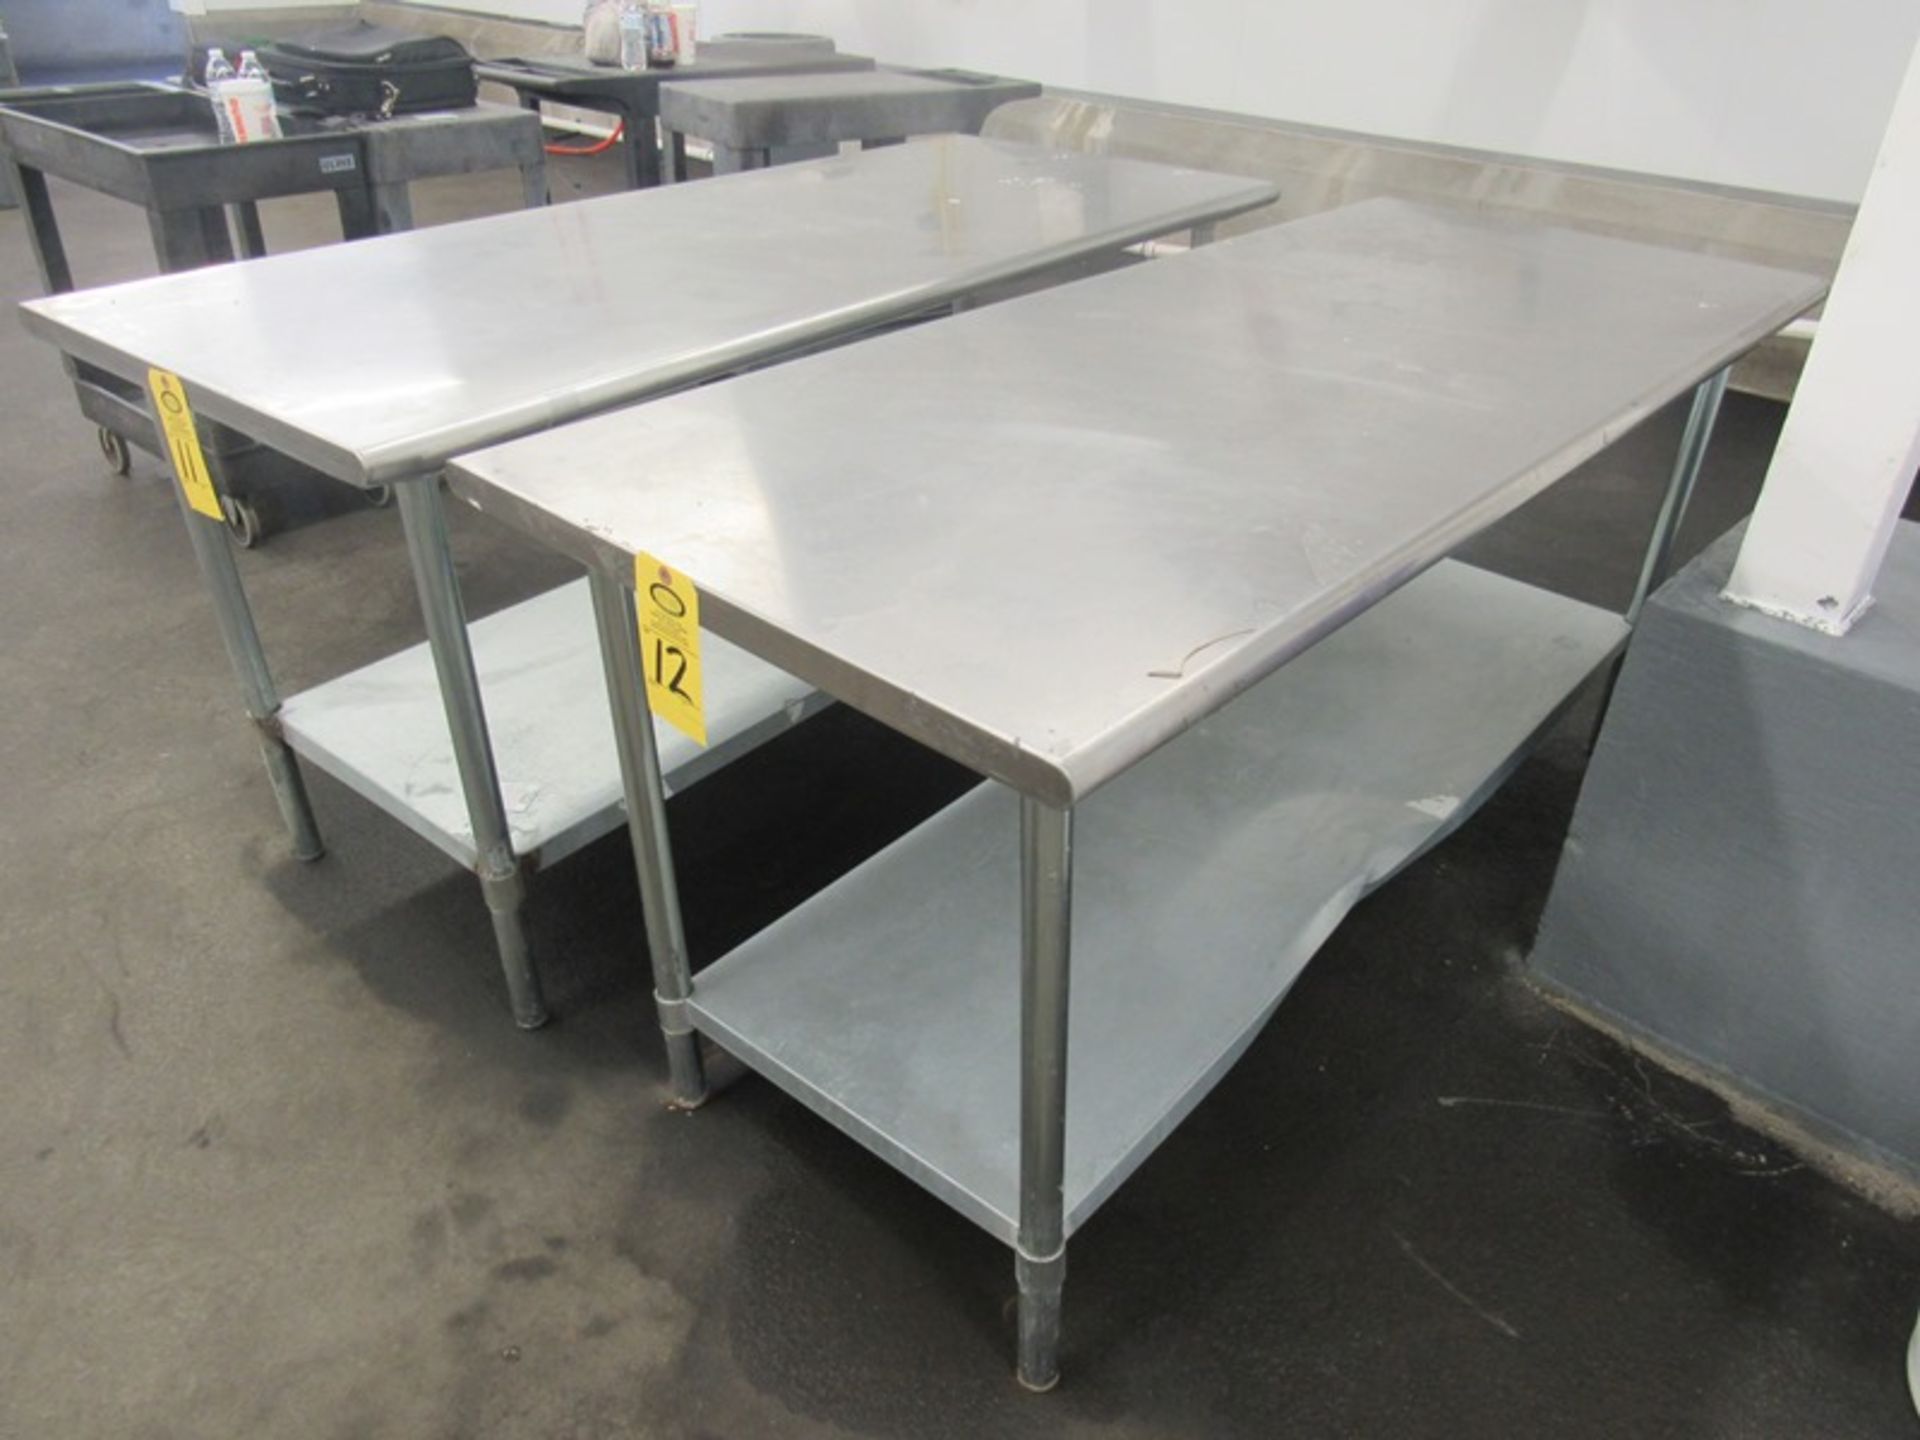 Stainless Steel Table, 30" W X 6' L (Required Rigging Fee: $50.00-Payment Must Be Received by